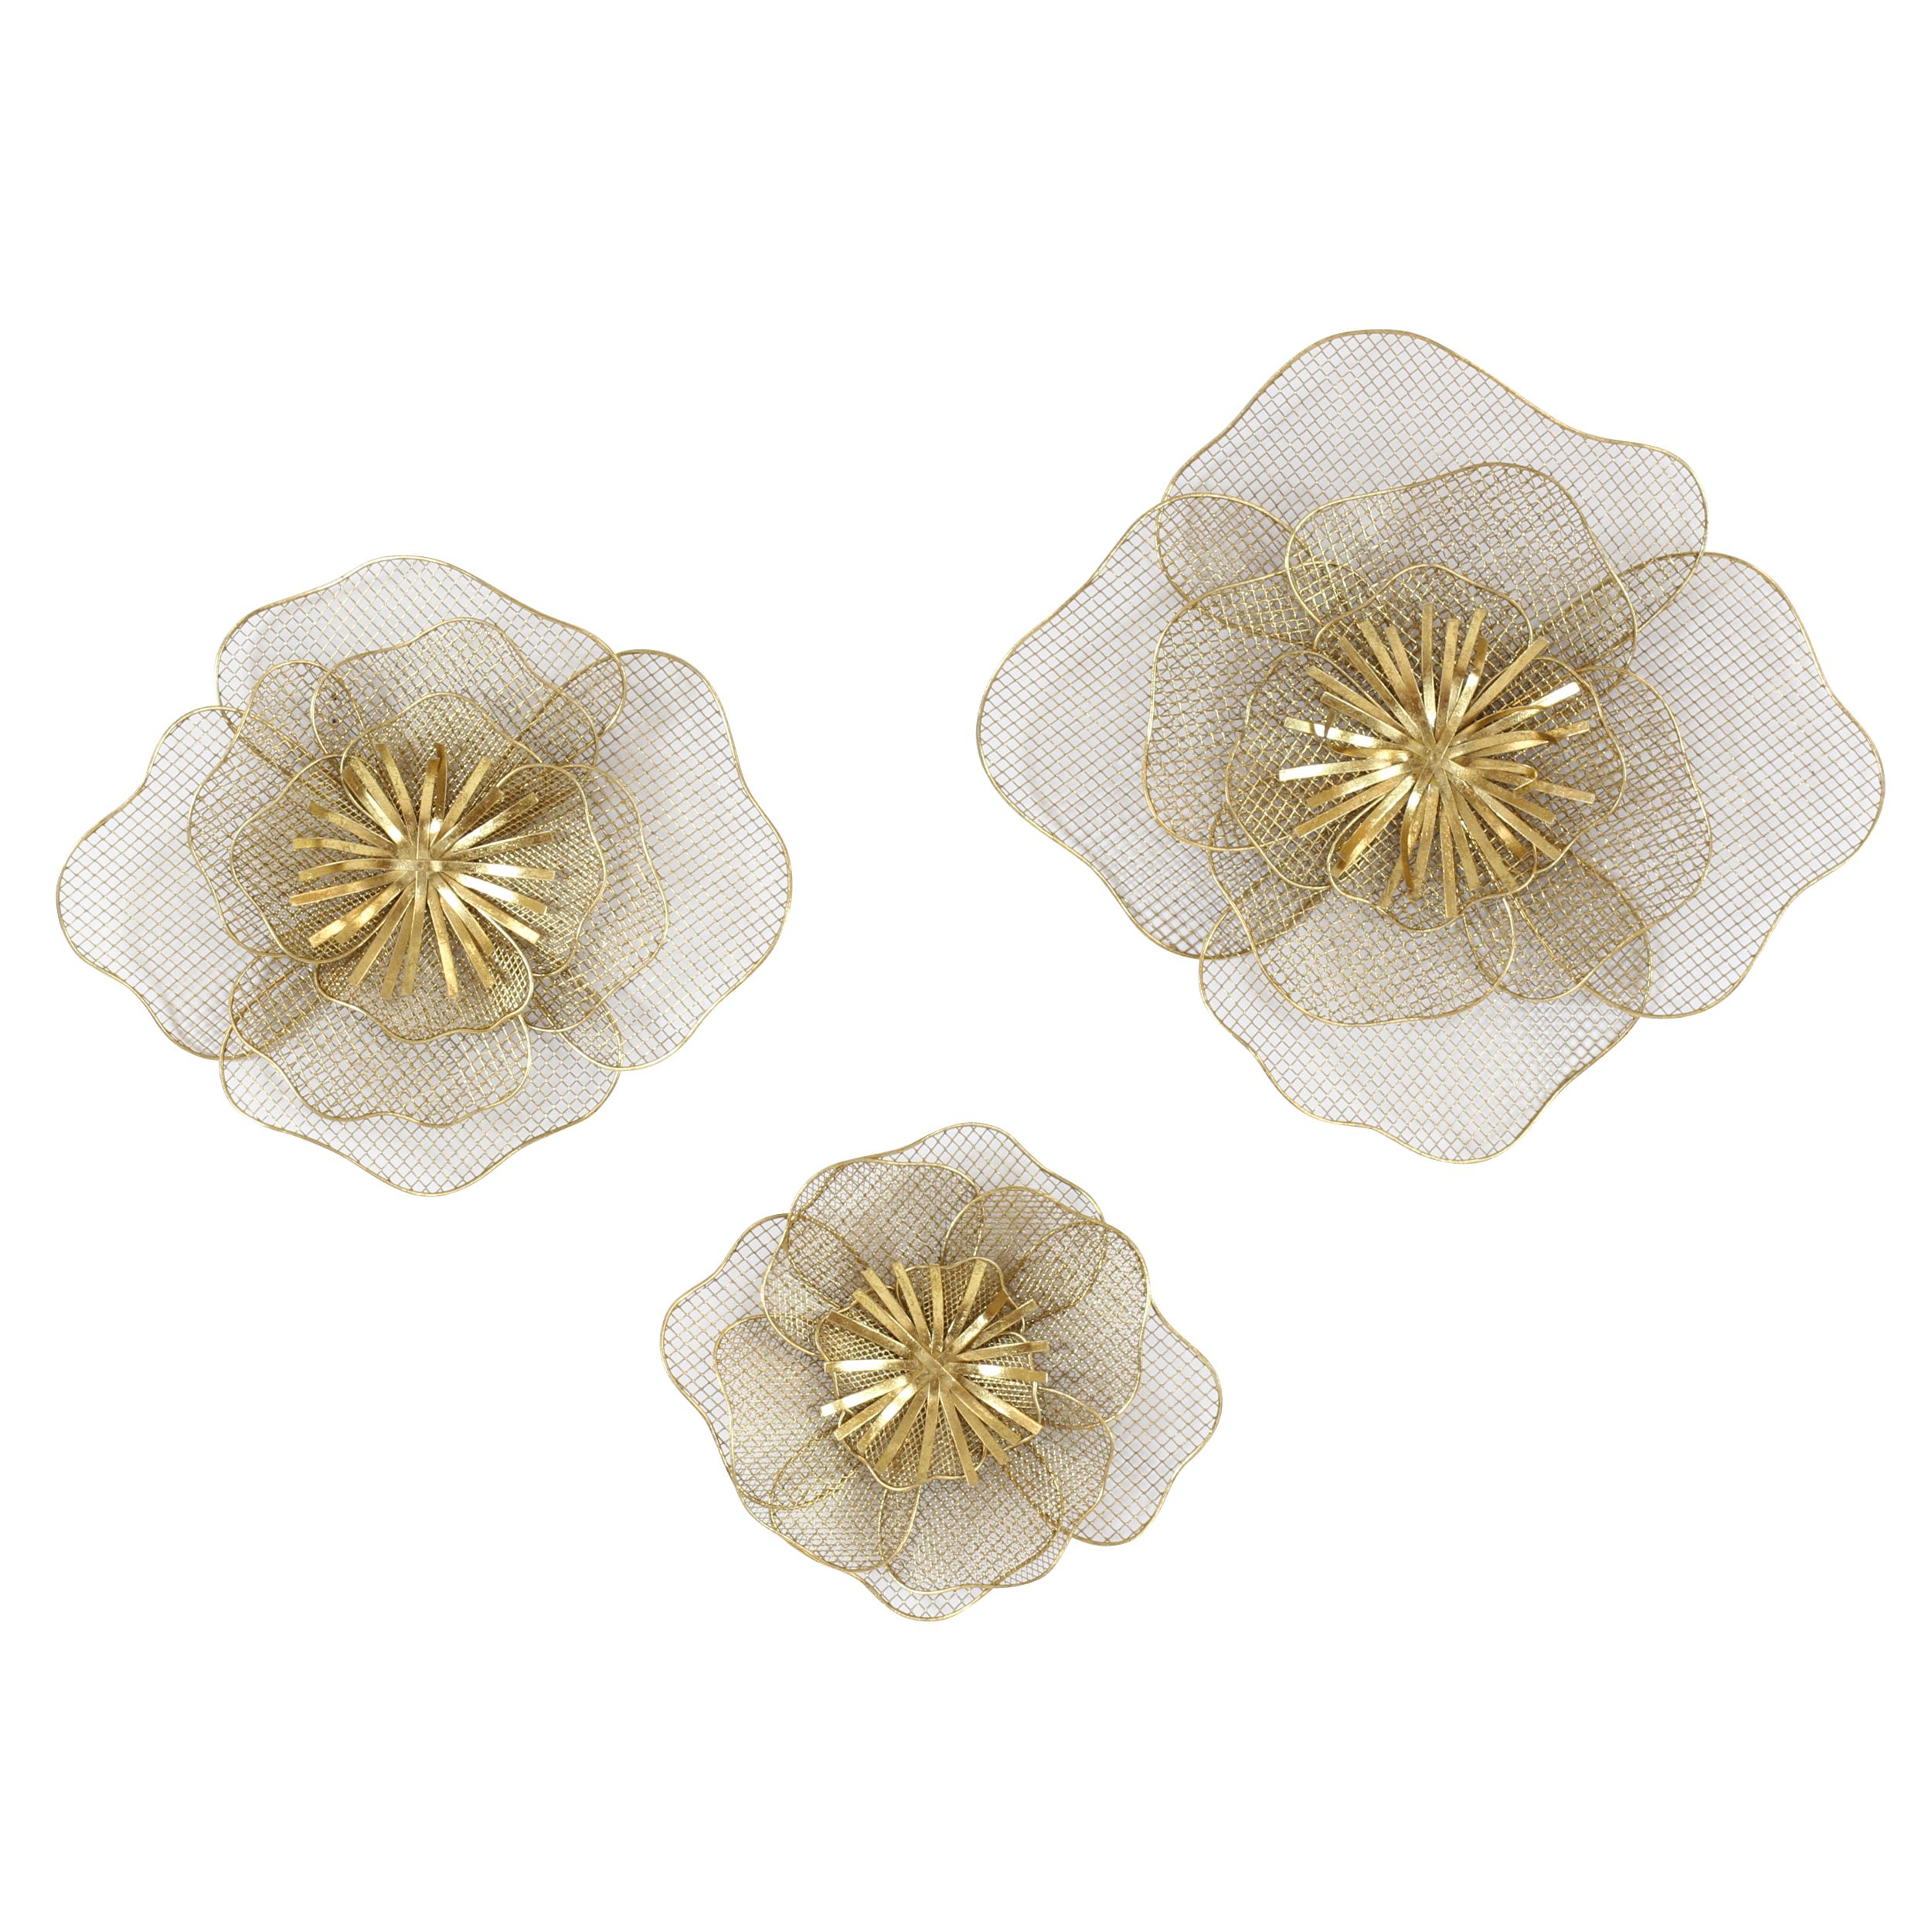 Lori Metal Flowers Wall Decor (set Of 3) – Walmart Intended For Widely Used 3 Piece Metal Flower Wall Décor Set (View 16 of 20)